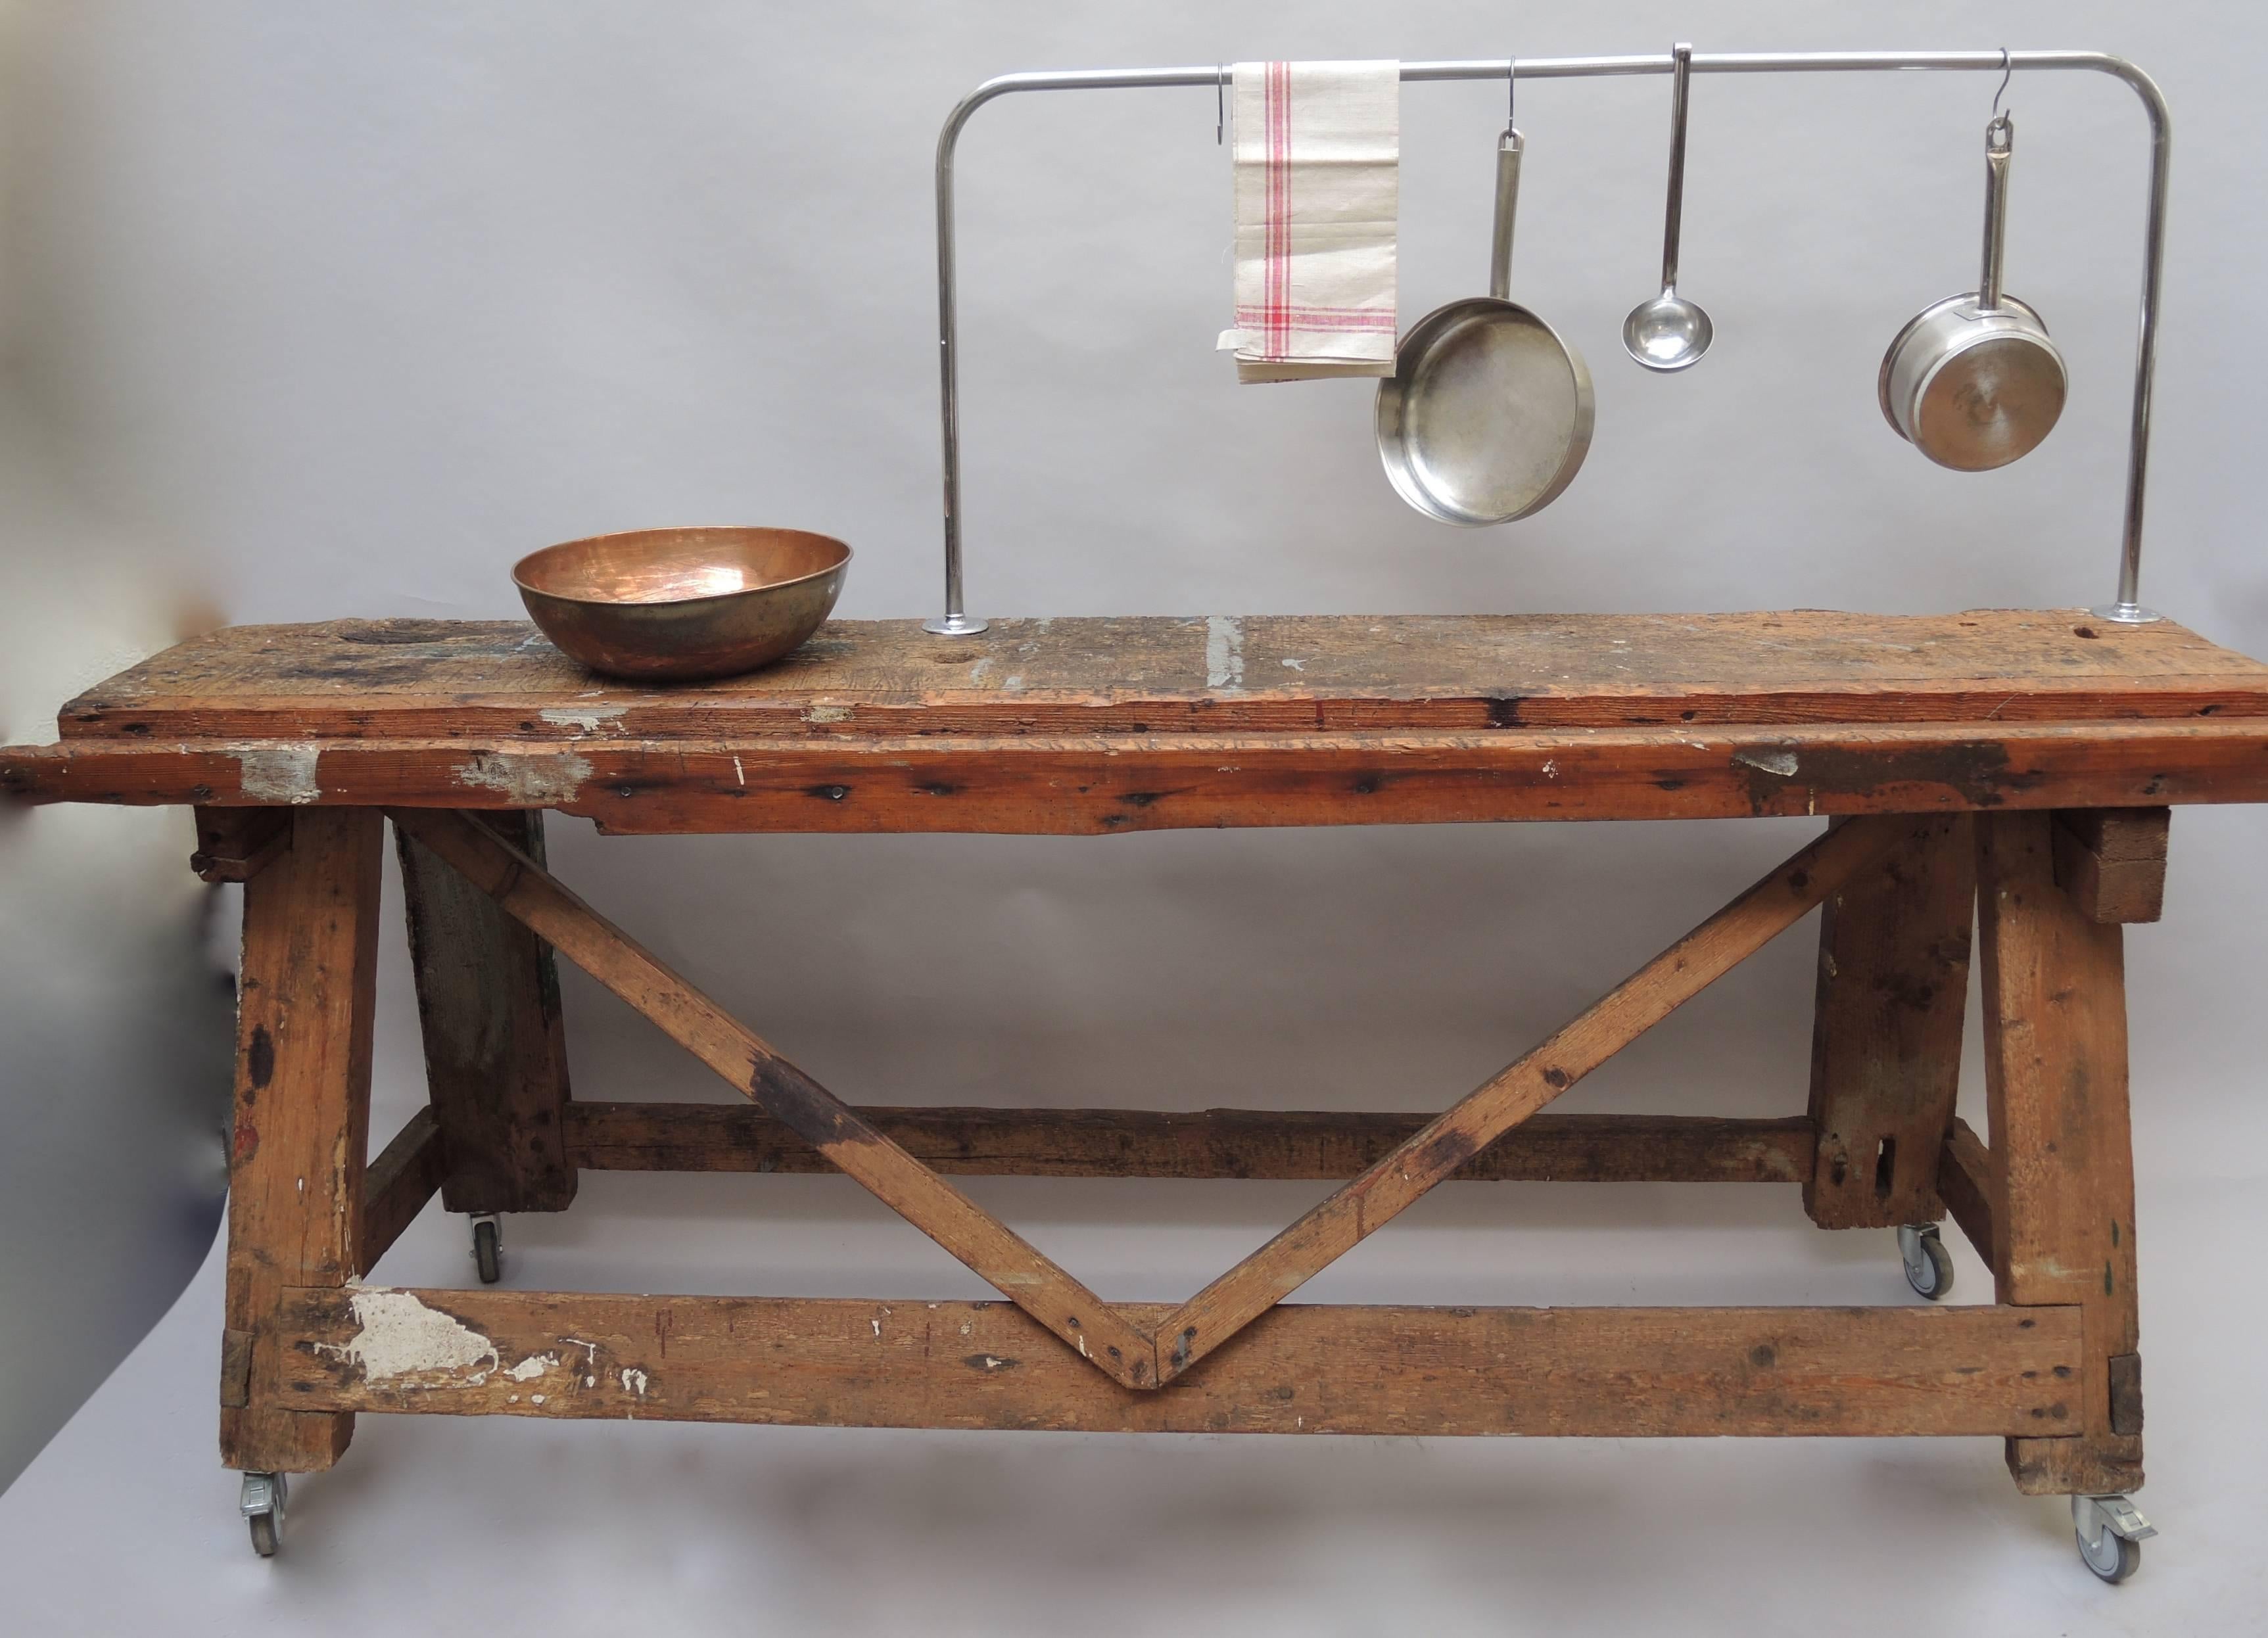 A great looking naturally worn work bench from a Belgian cabinet makers workshop. Old splatters of paint and saw cuts add to the perfect mellow patina of the honey colored oak work surface. There is a chrome bar that would be great to use to hang